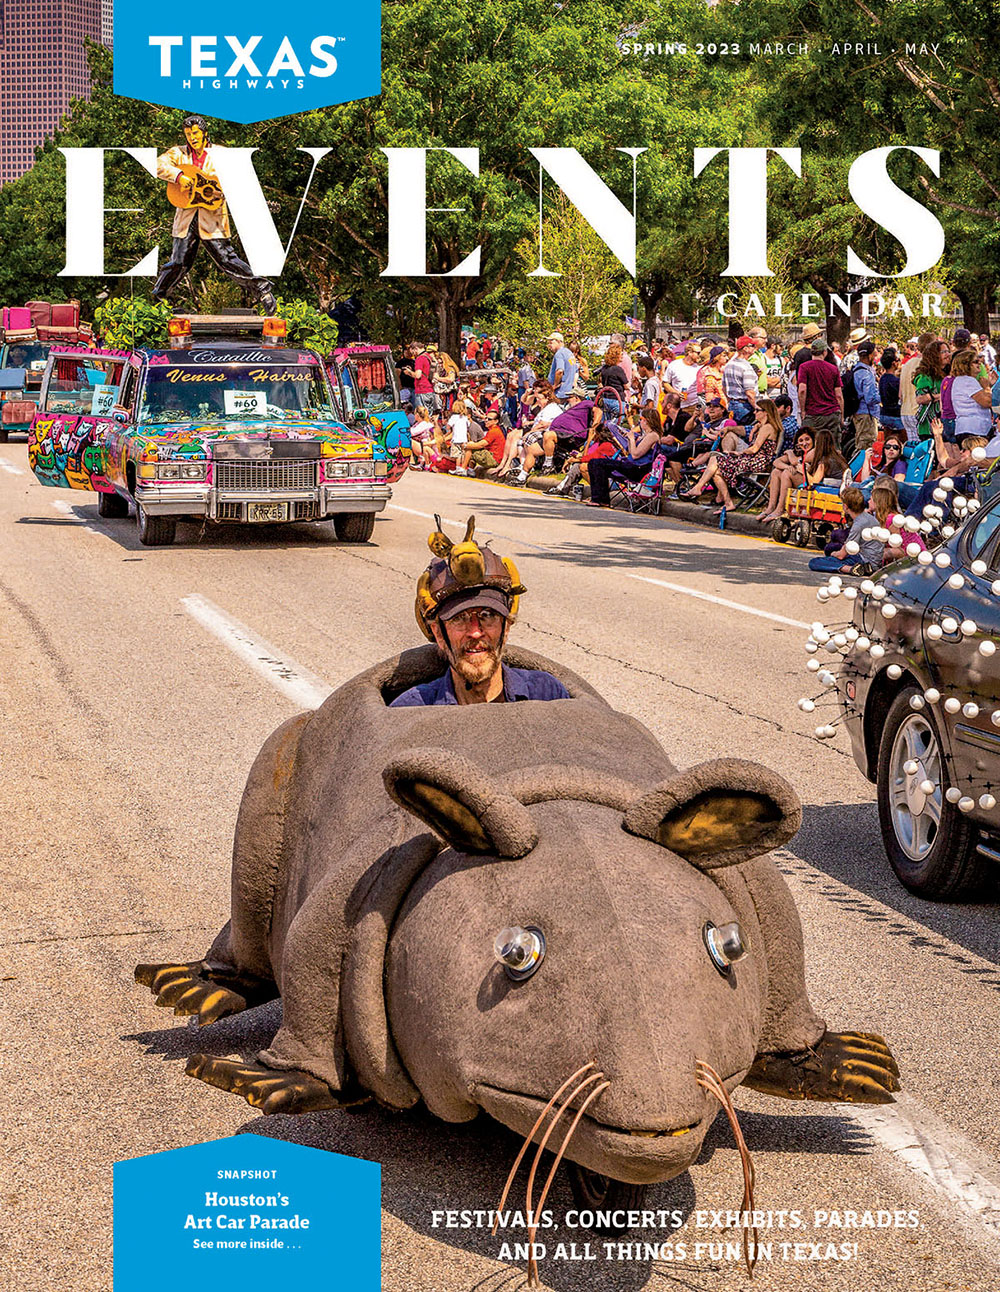 The cover of the Texas Highways Events Calendar reading "Texas State Parks 100"